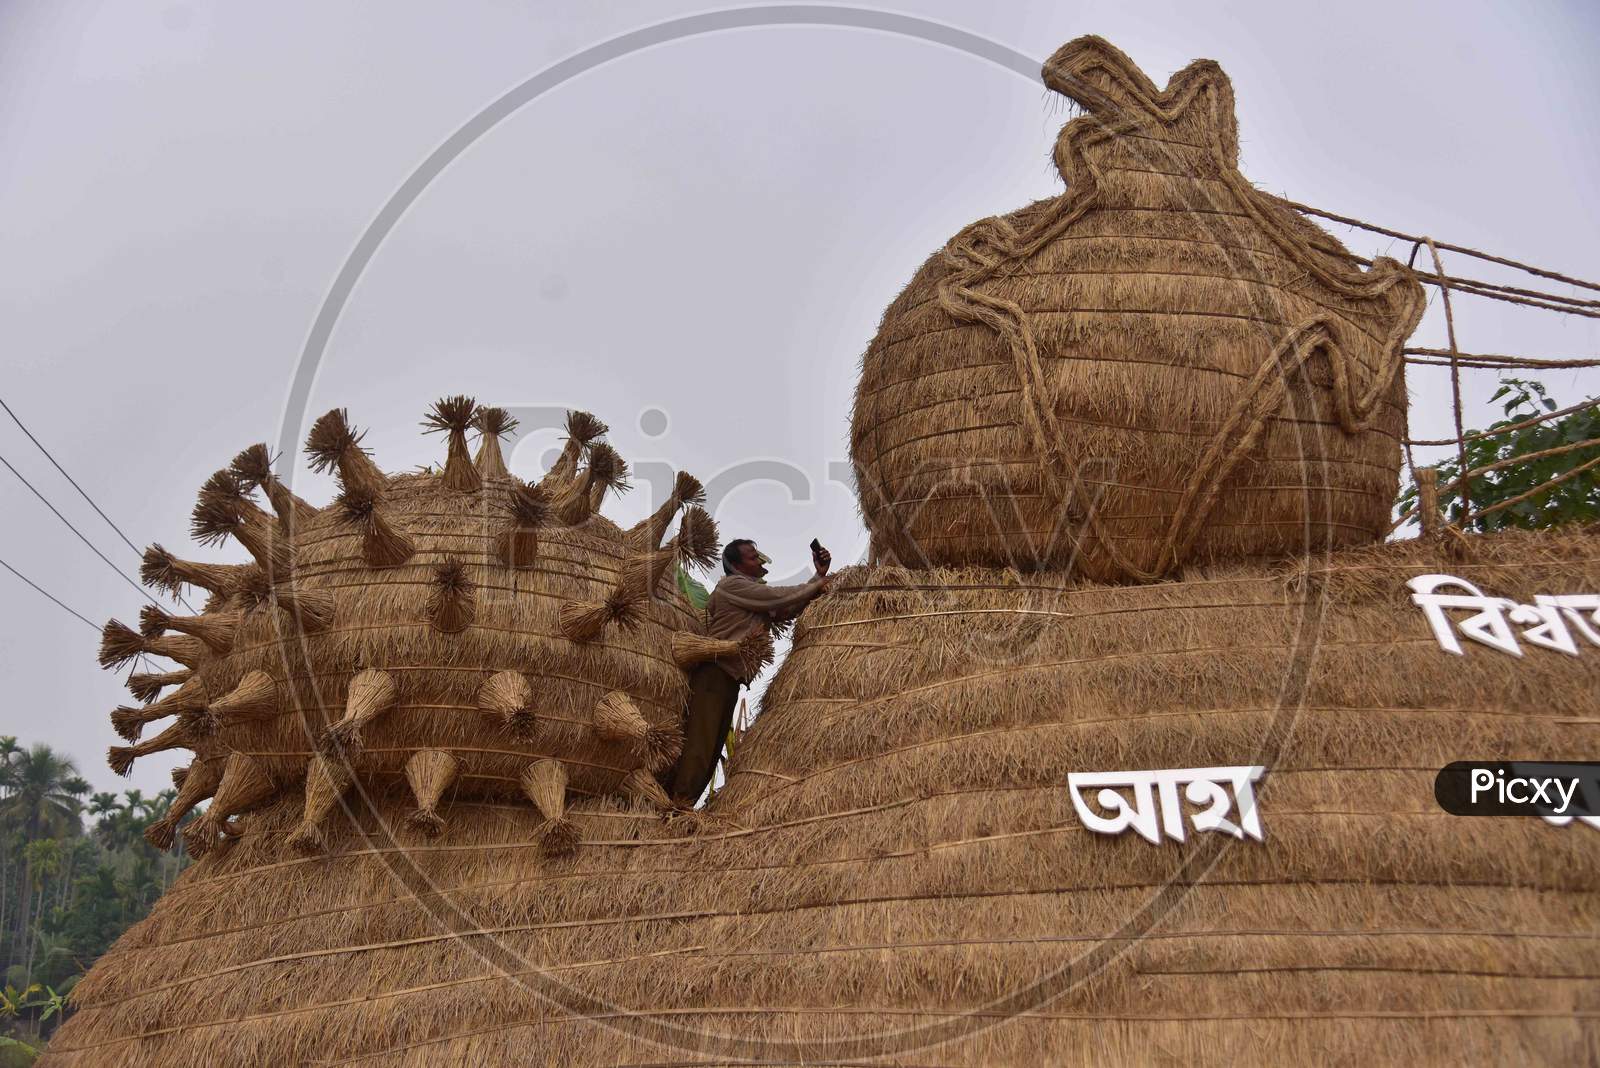 Workers prepare a makeshift cottage called Bhelaghar with protecting the world from COVID-19 as a theme ahead of the Magh Bihu festival in Nagaon district, in the northeastern state of Assam on Jan 13,2021